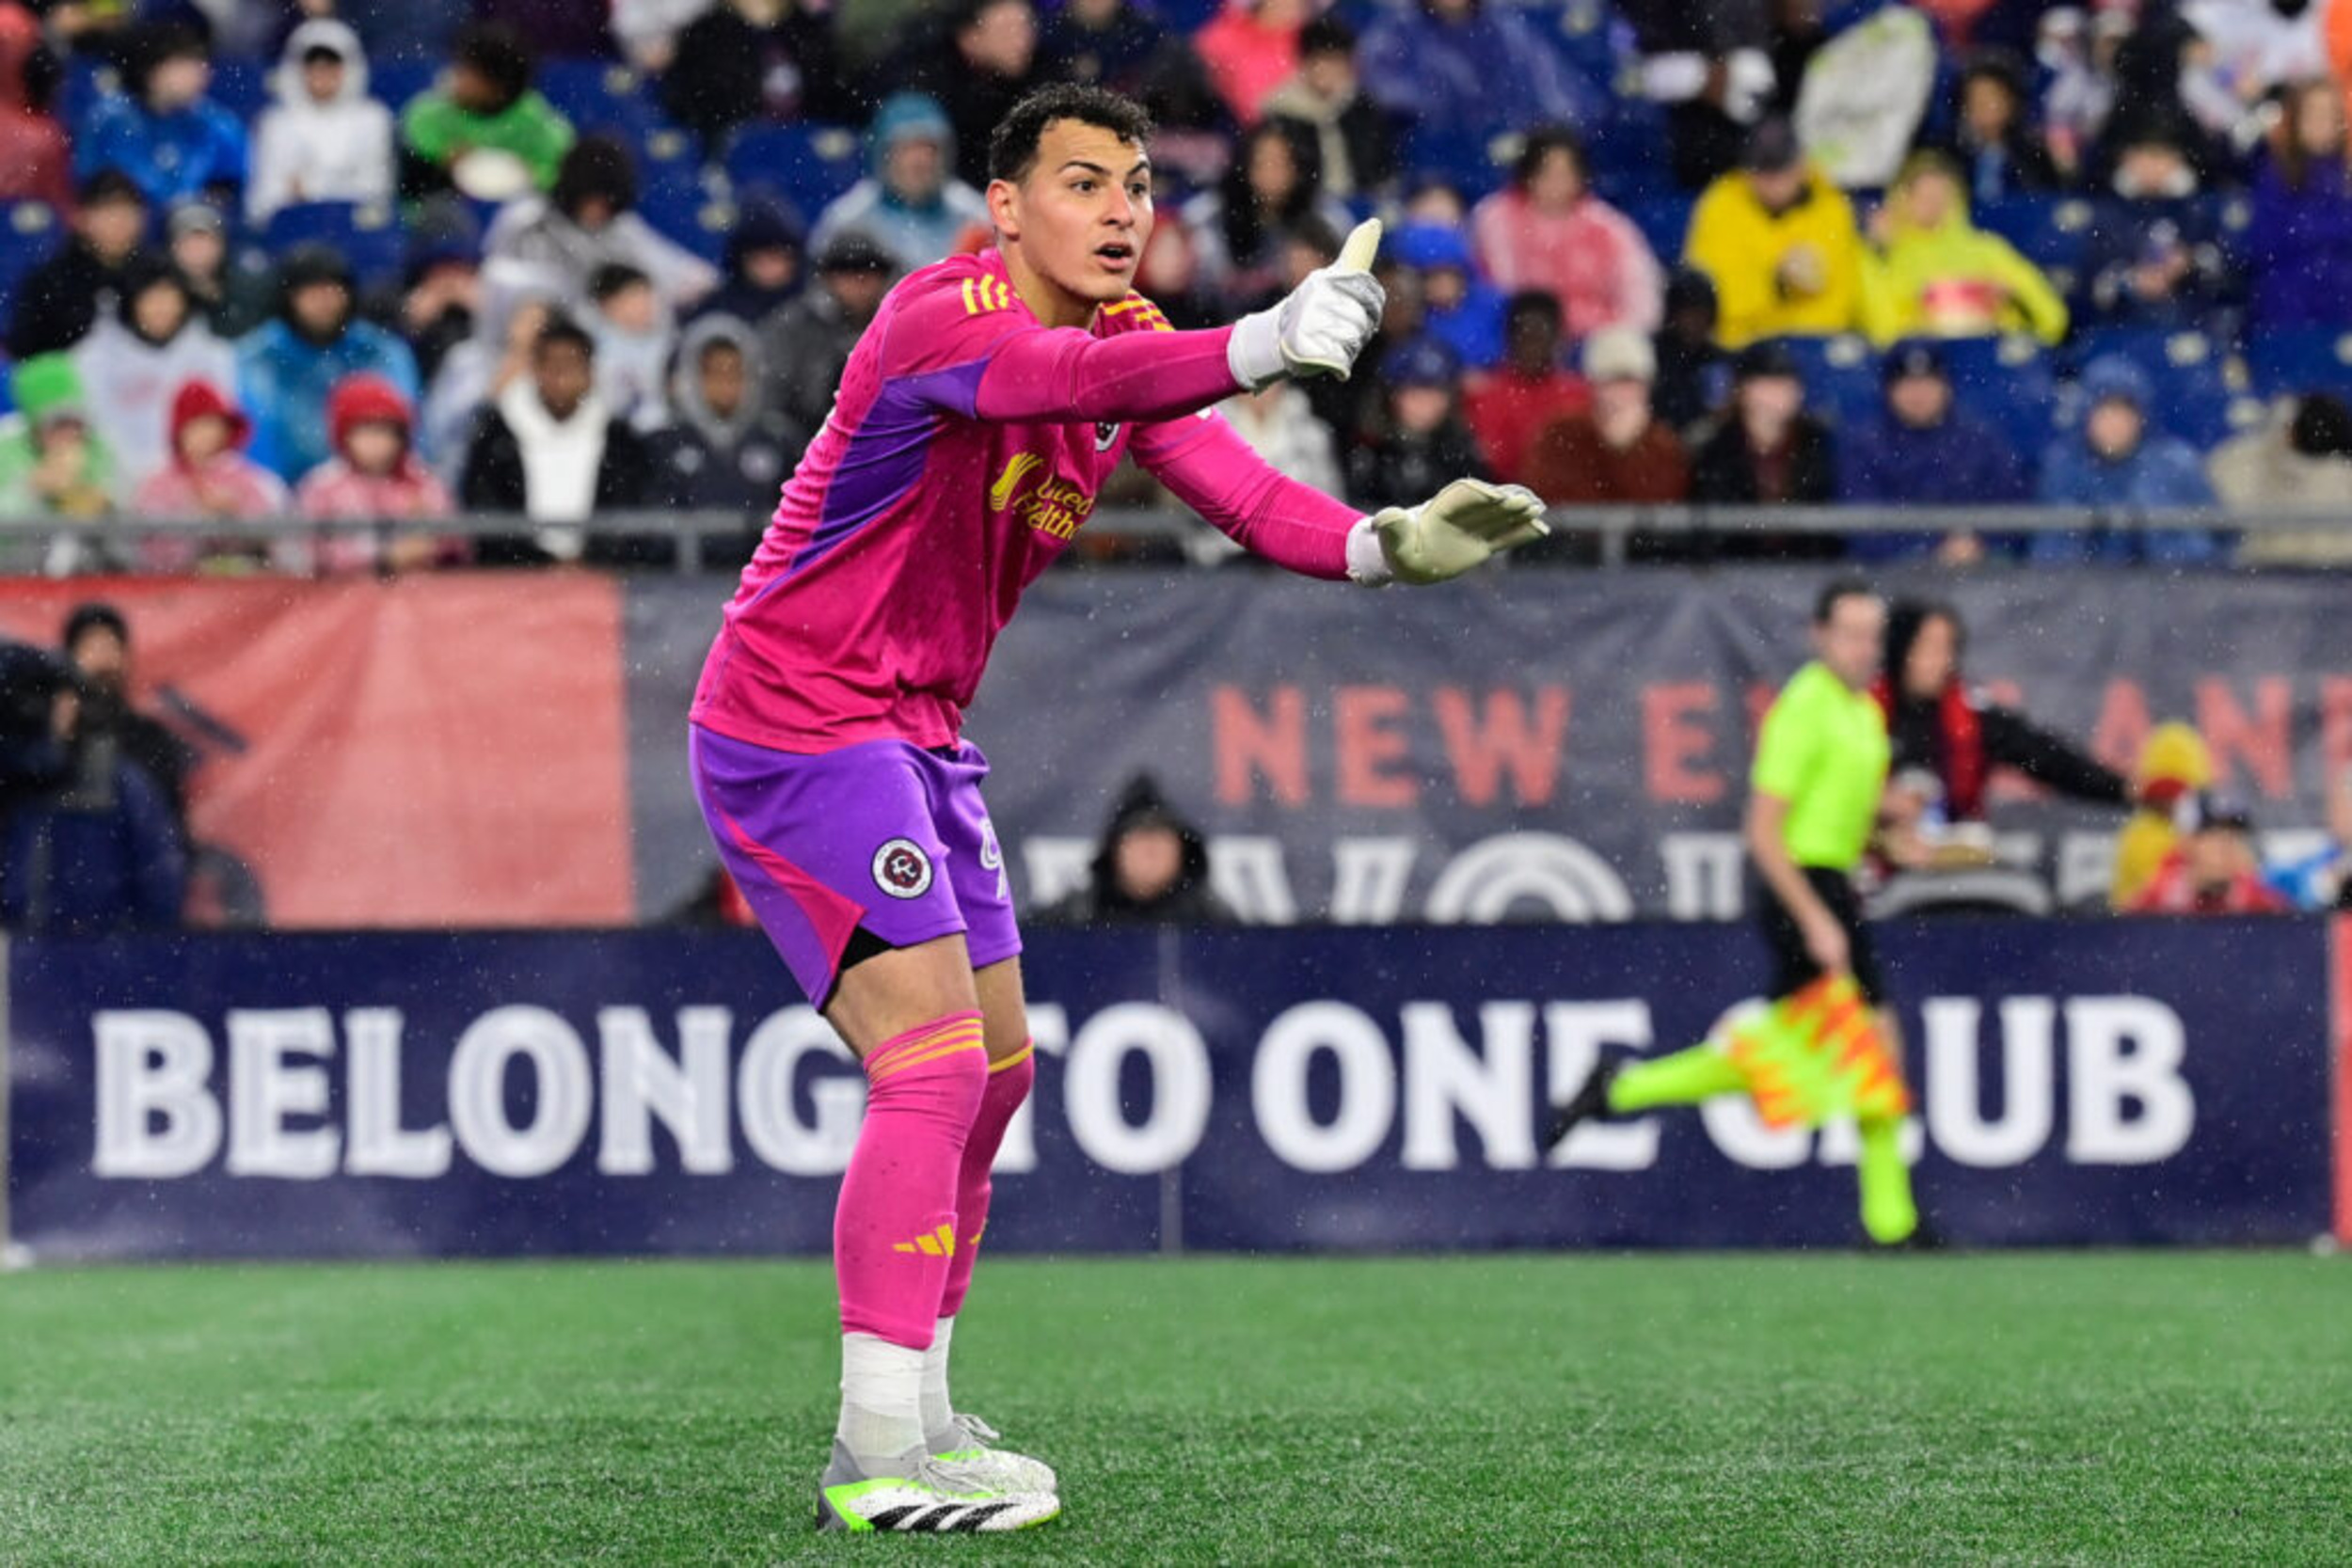 Exclusive Interview: Jacob Jackson Talks MLS Cup Playoffs, Loving Life as a Goalkeeper, His Passion for Golf and Much More…